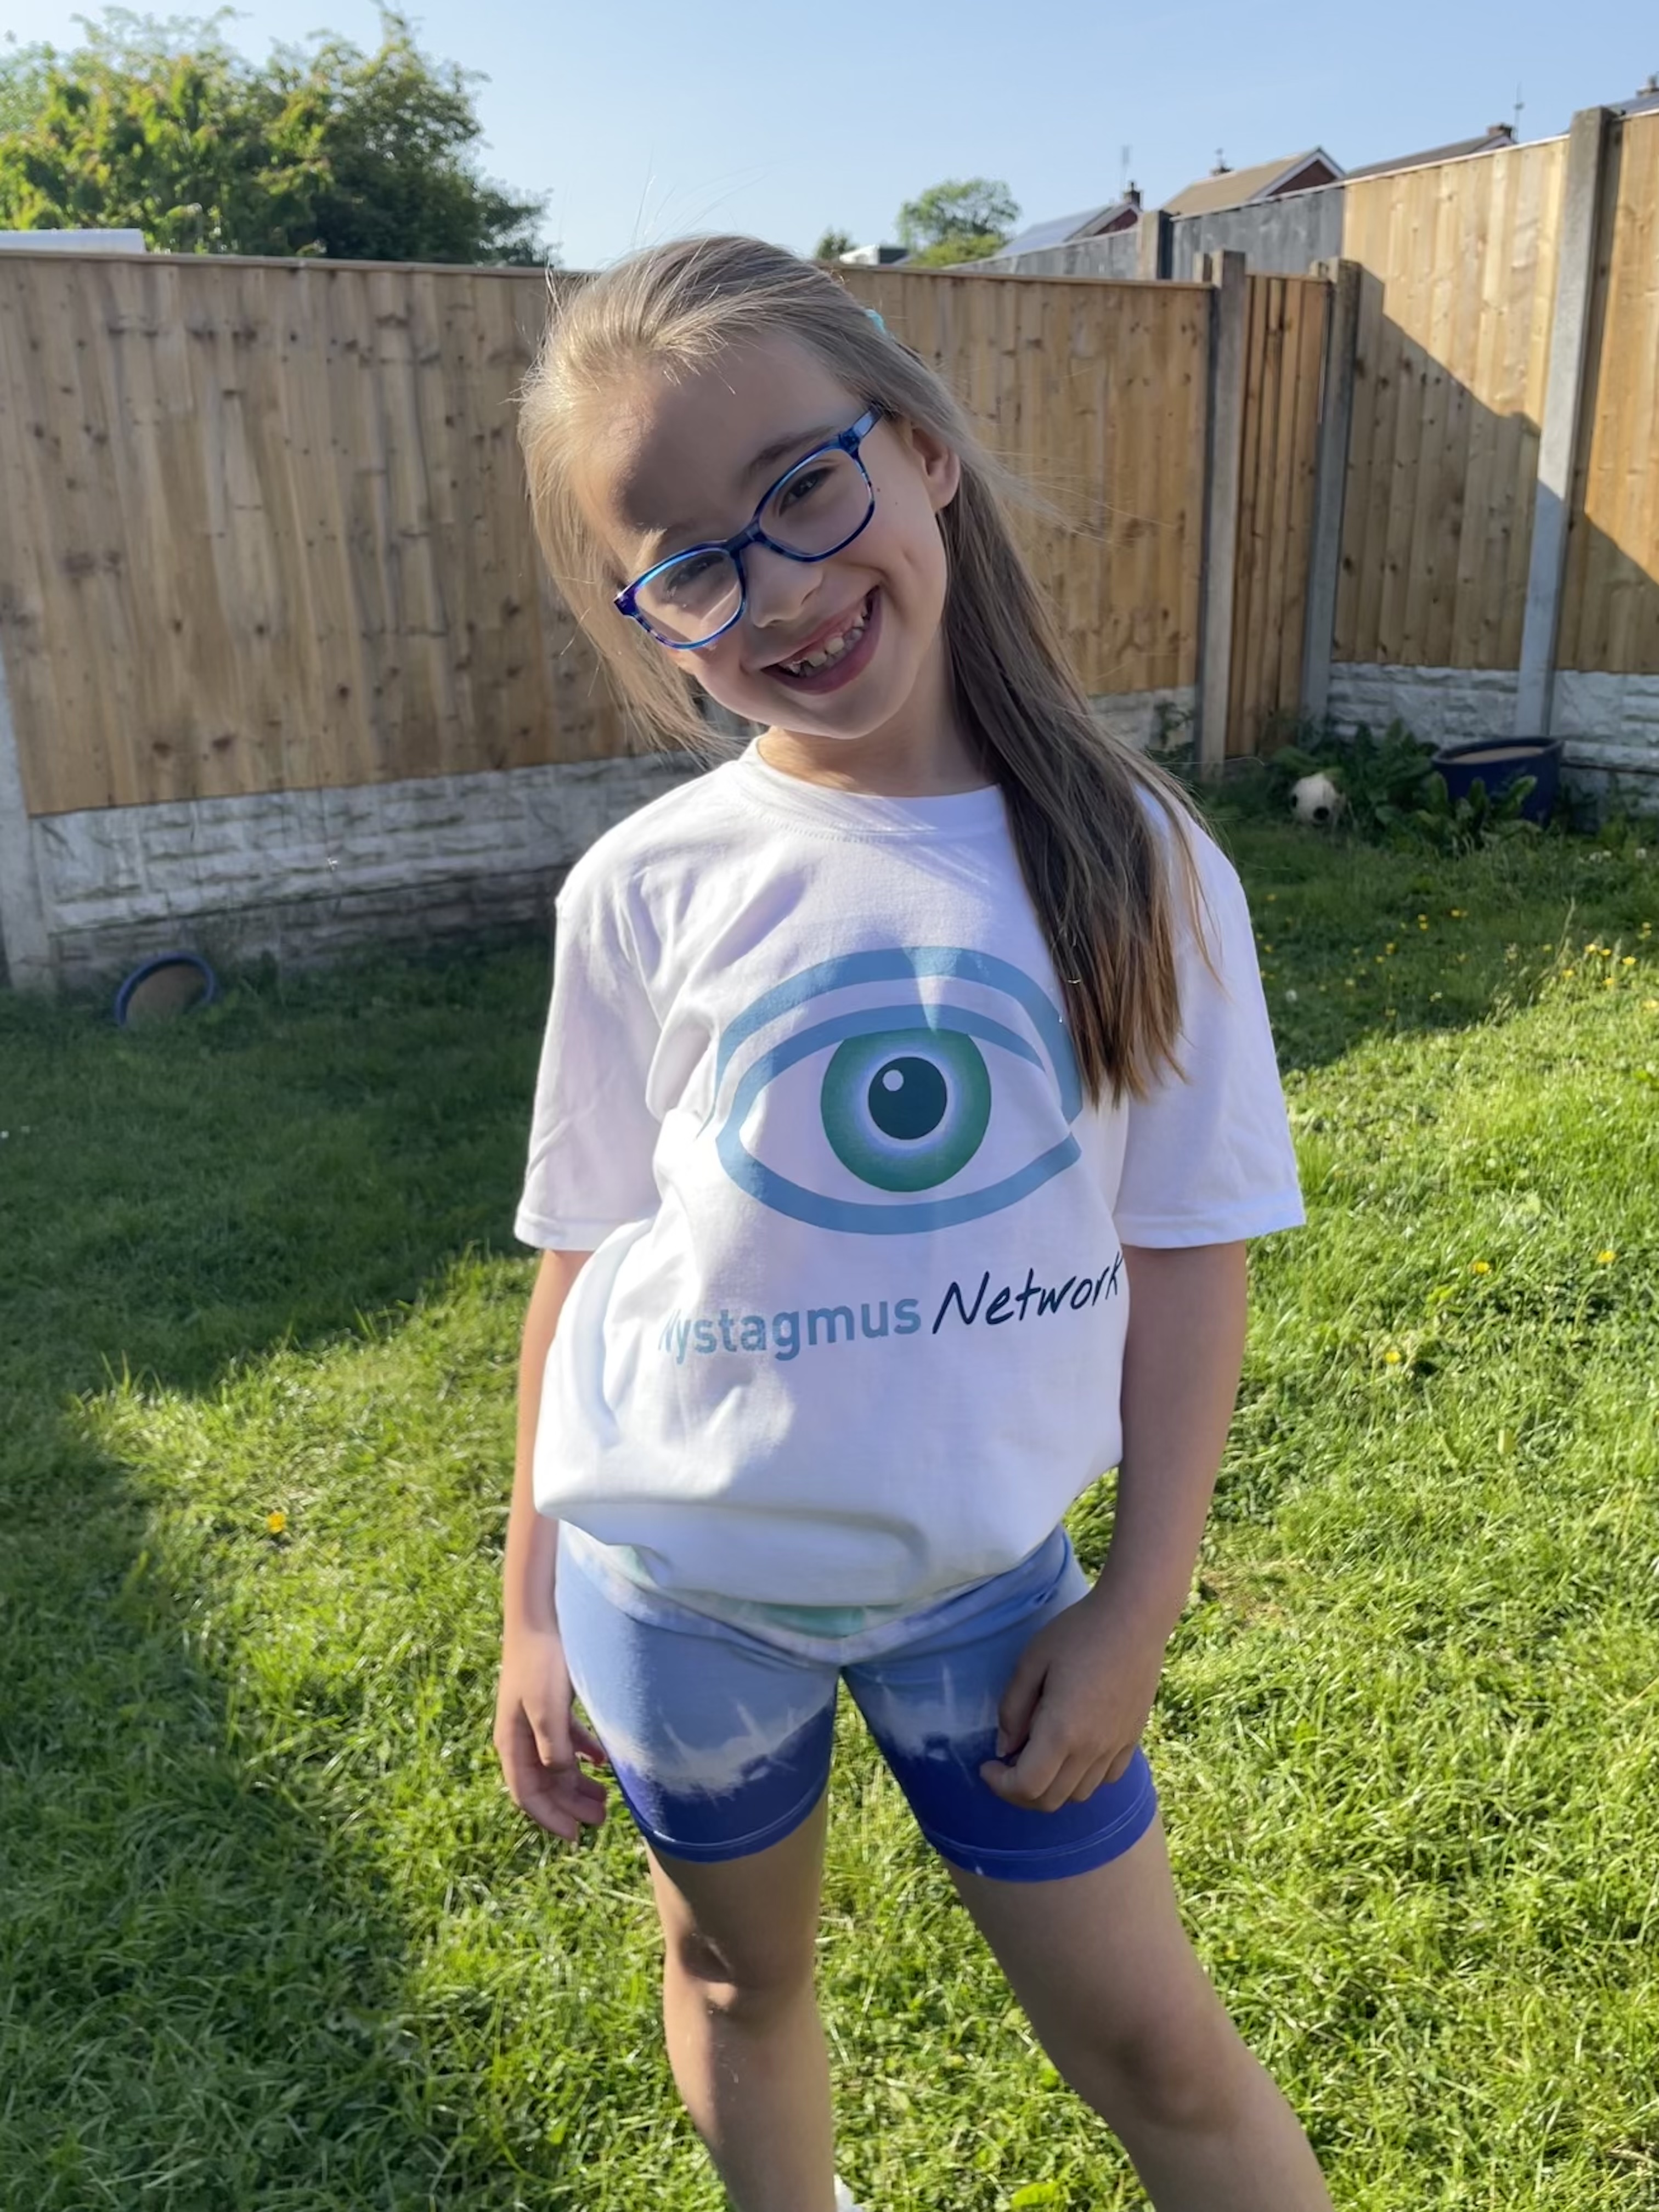 Robyn stands in a garden, wearing a Nystagmus Network T-shirt.